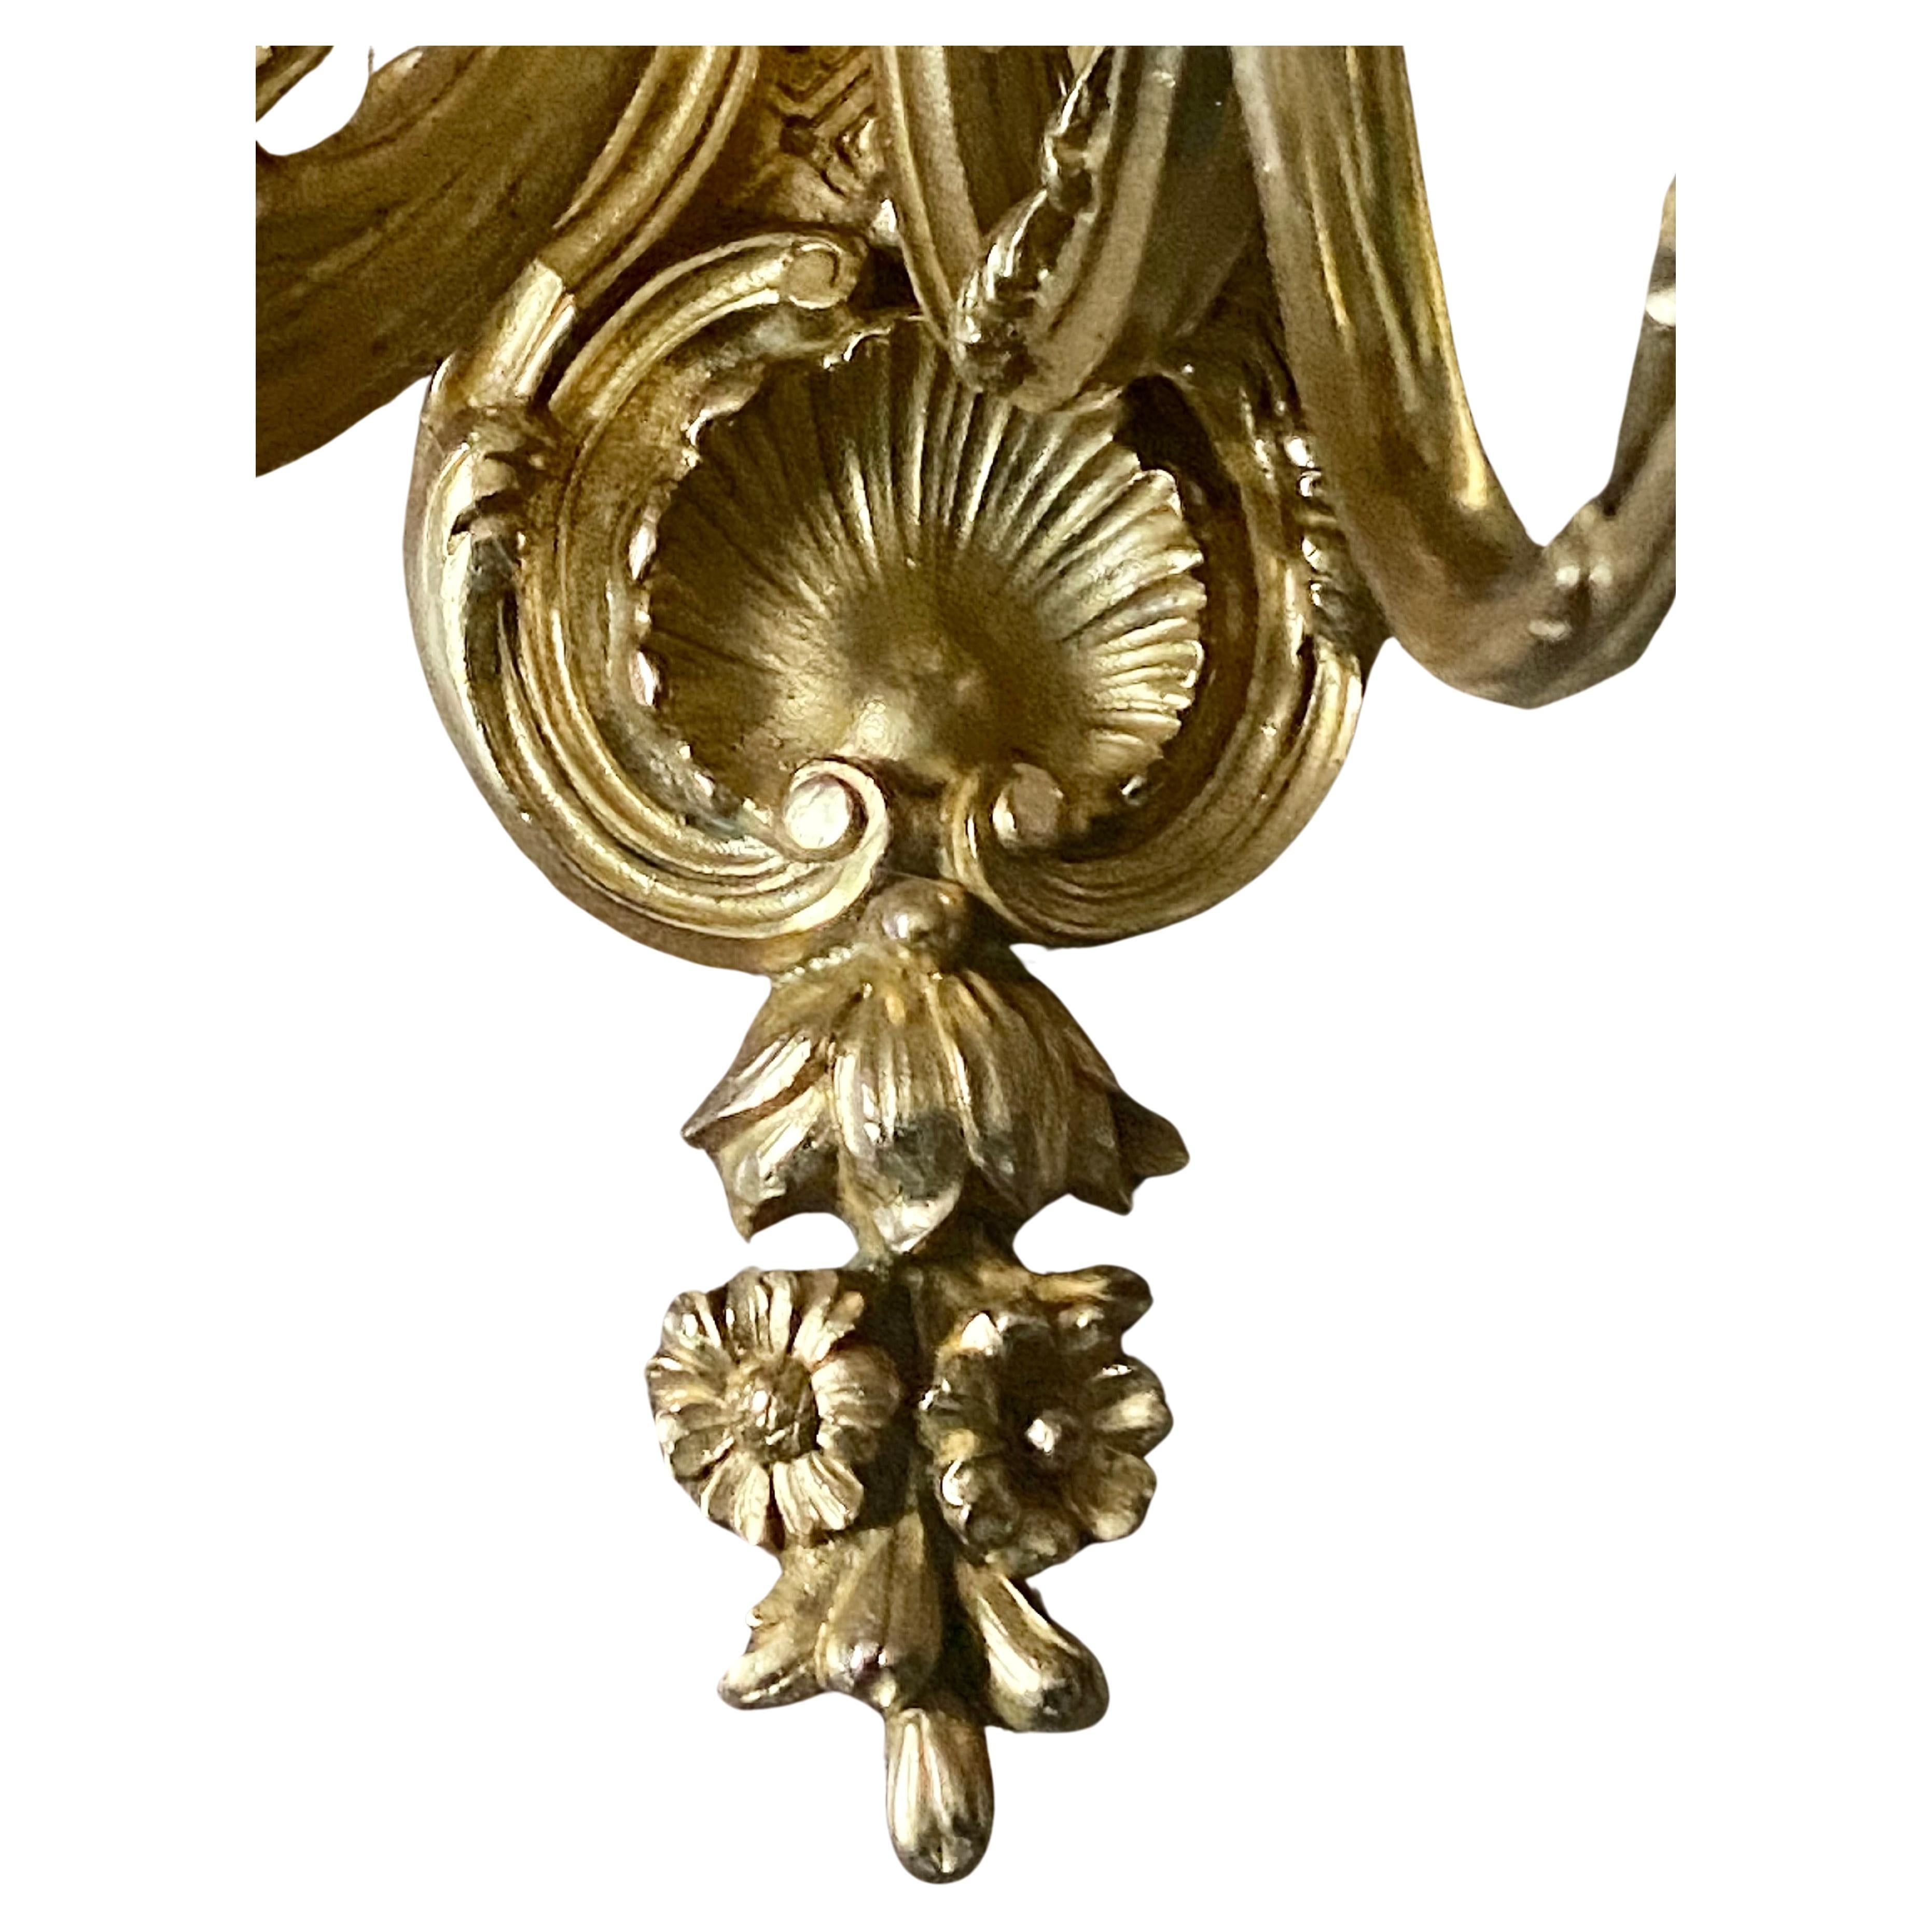 A Large Pair of 19th Century French Gilt Bronze Dore Cherub Wall Sconces For Sale 3